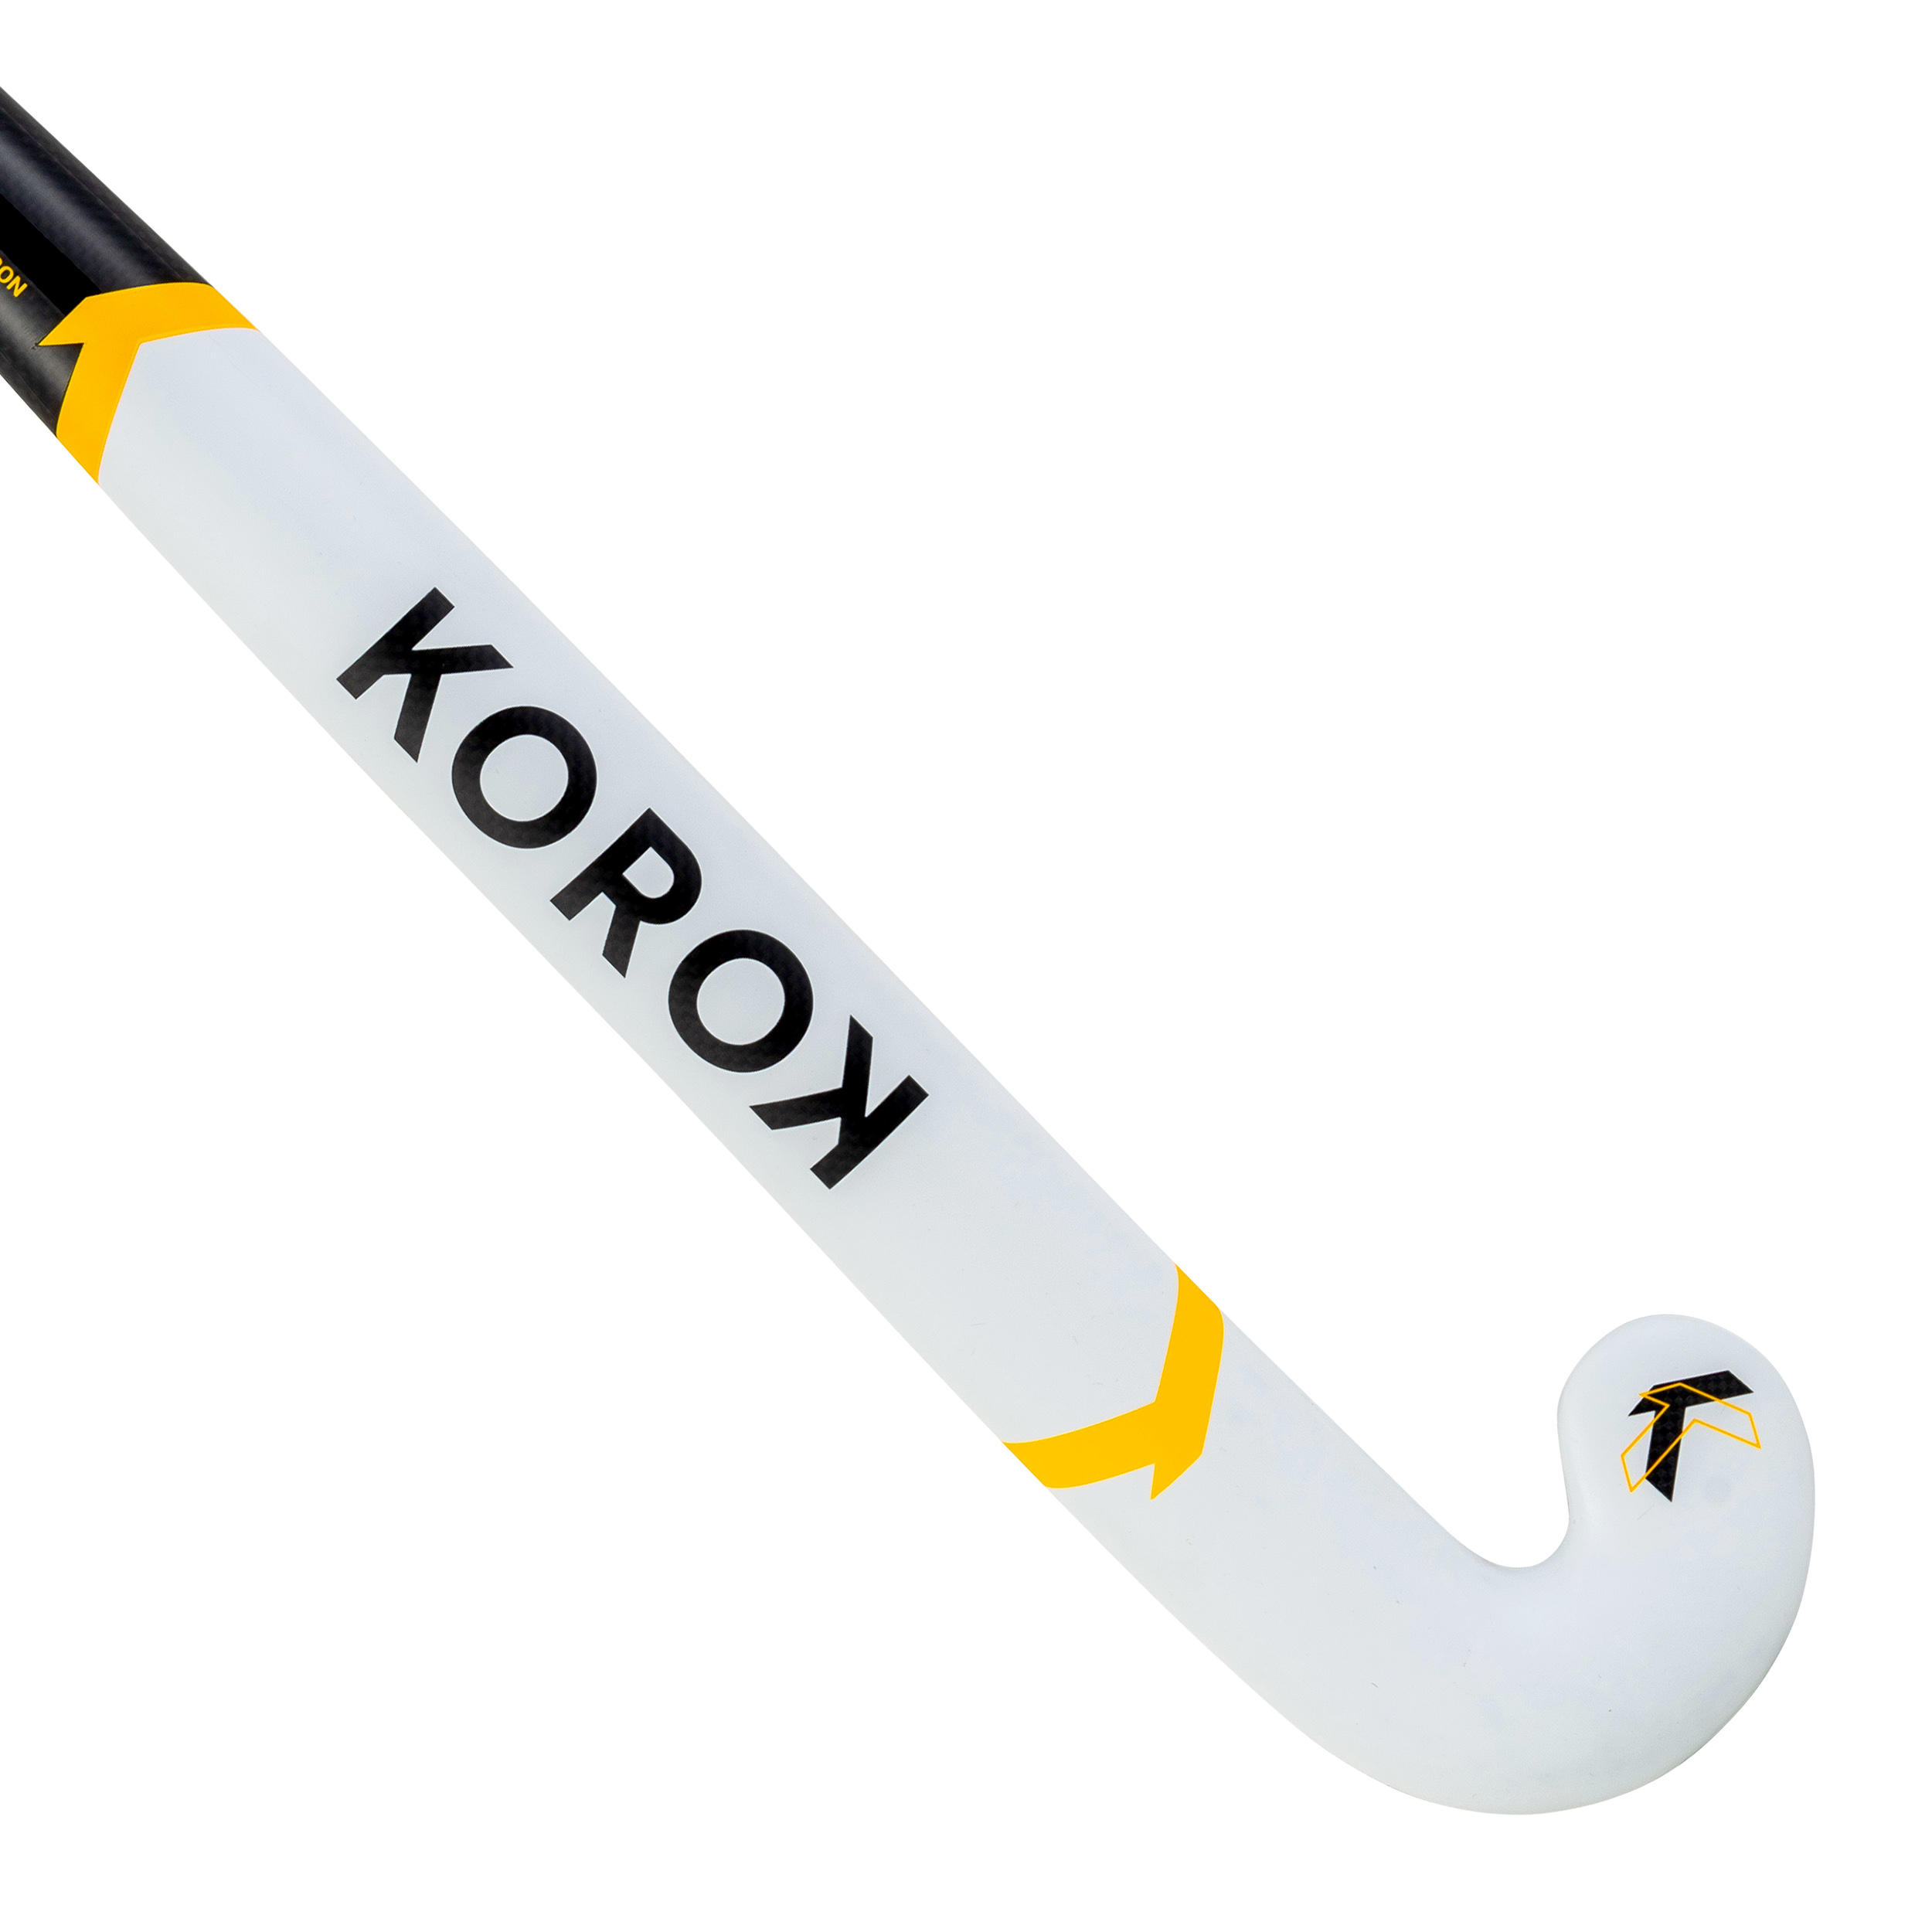 Adult Intermediate 60% Carbon Low Bow Field Hockey Stick FH560 - White/Yellow 8/12